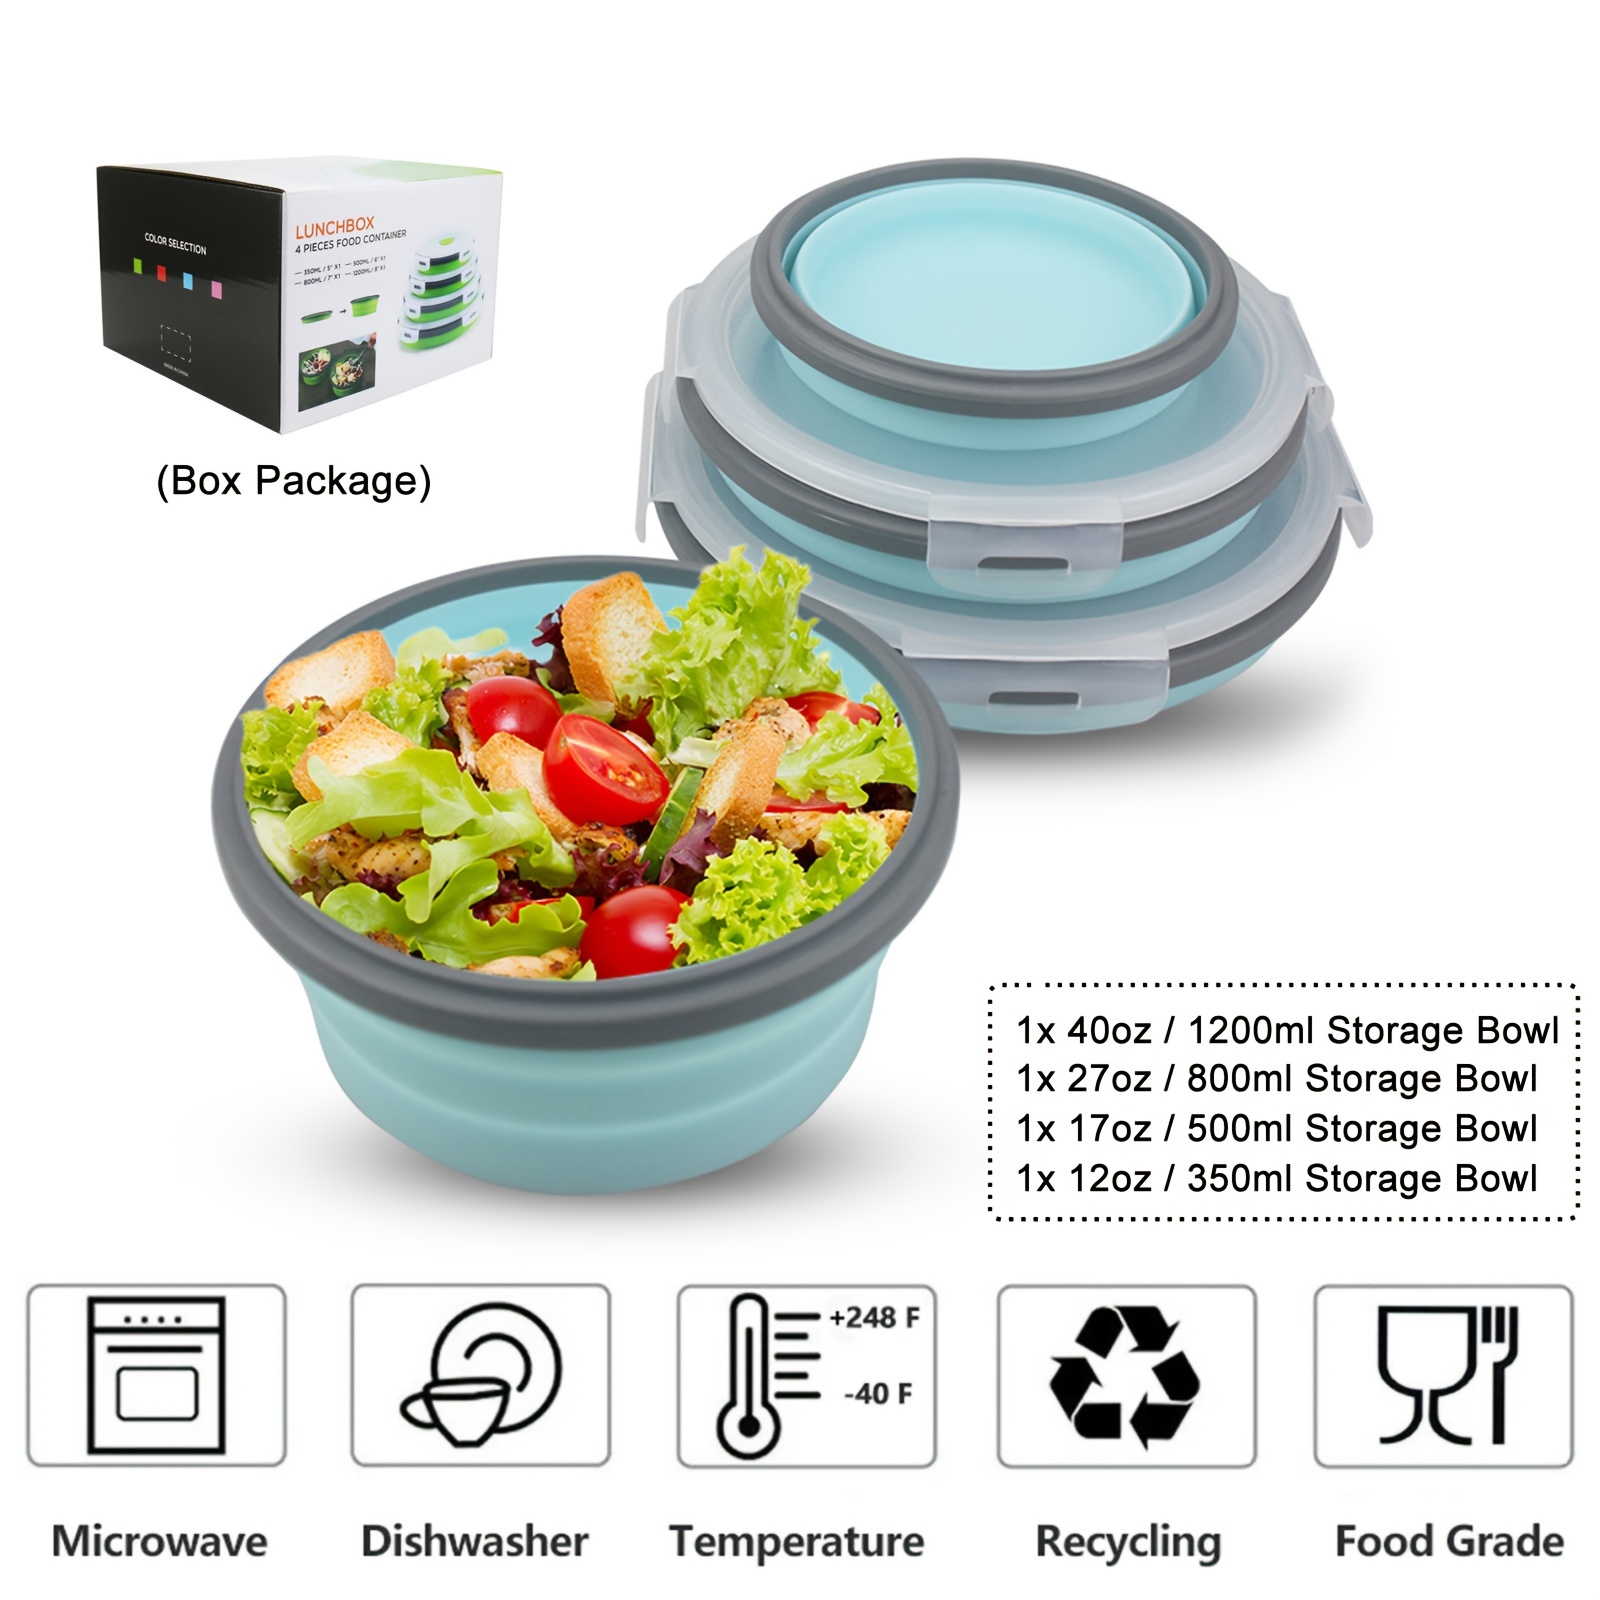 Meal Prep Containers for Food Storage, Food Containers Lunch Boxes Bowls  with Lids, BPA Free Food Grade, Freezer and Microwave Safe